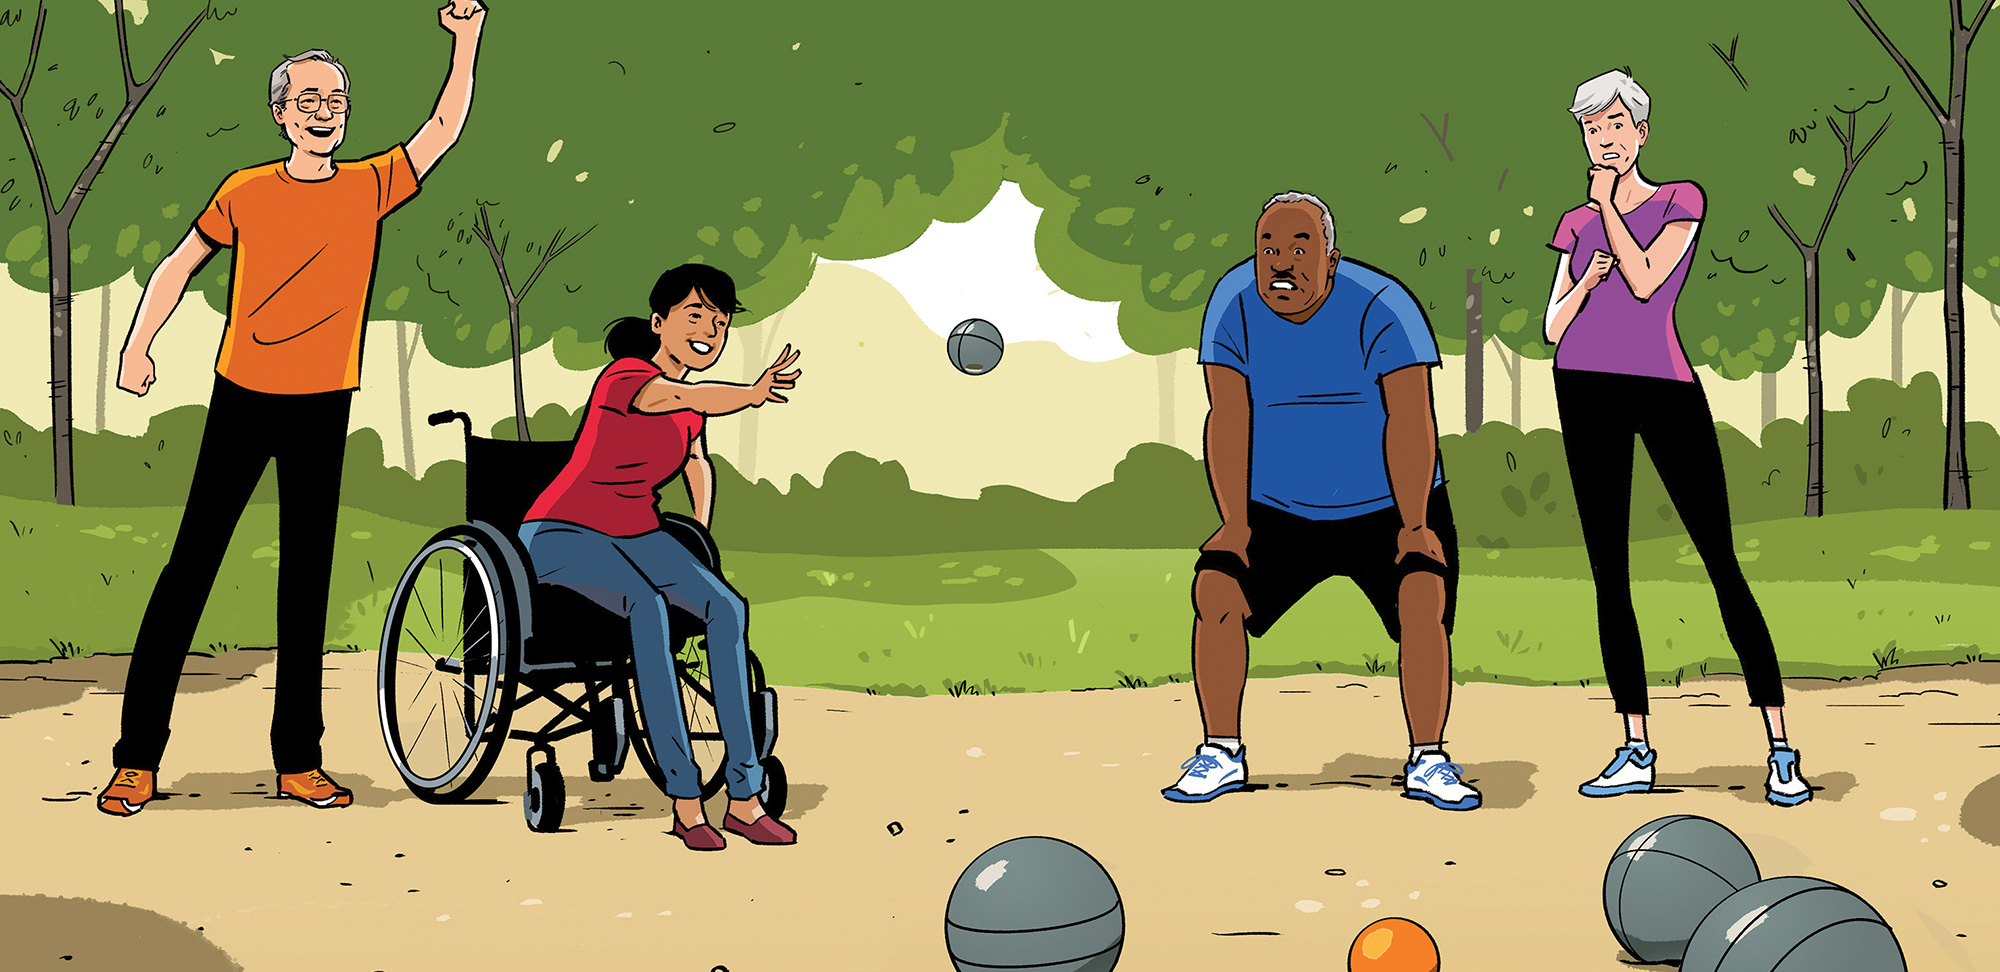 Illustration of a group of people playing Pétanque, a game similar to Bocce